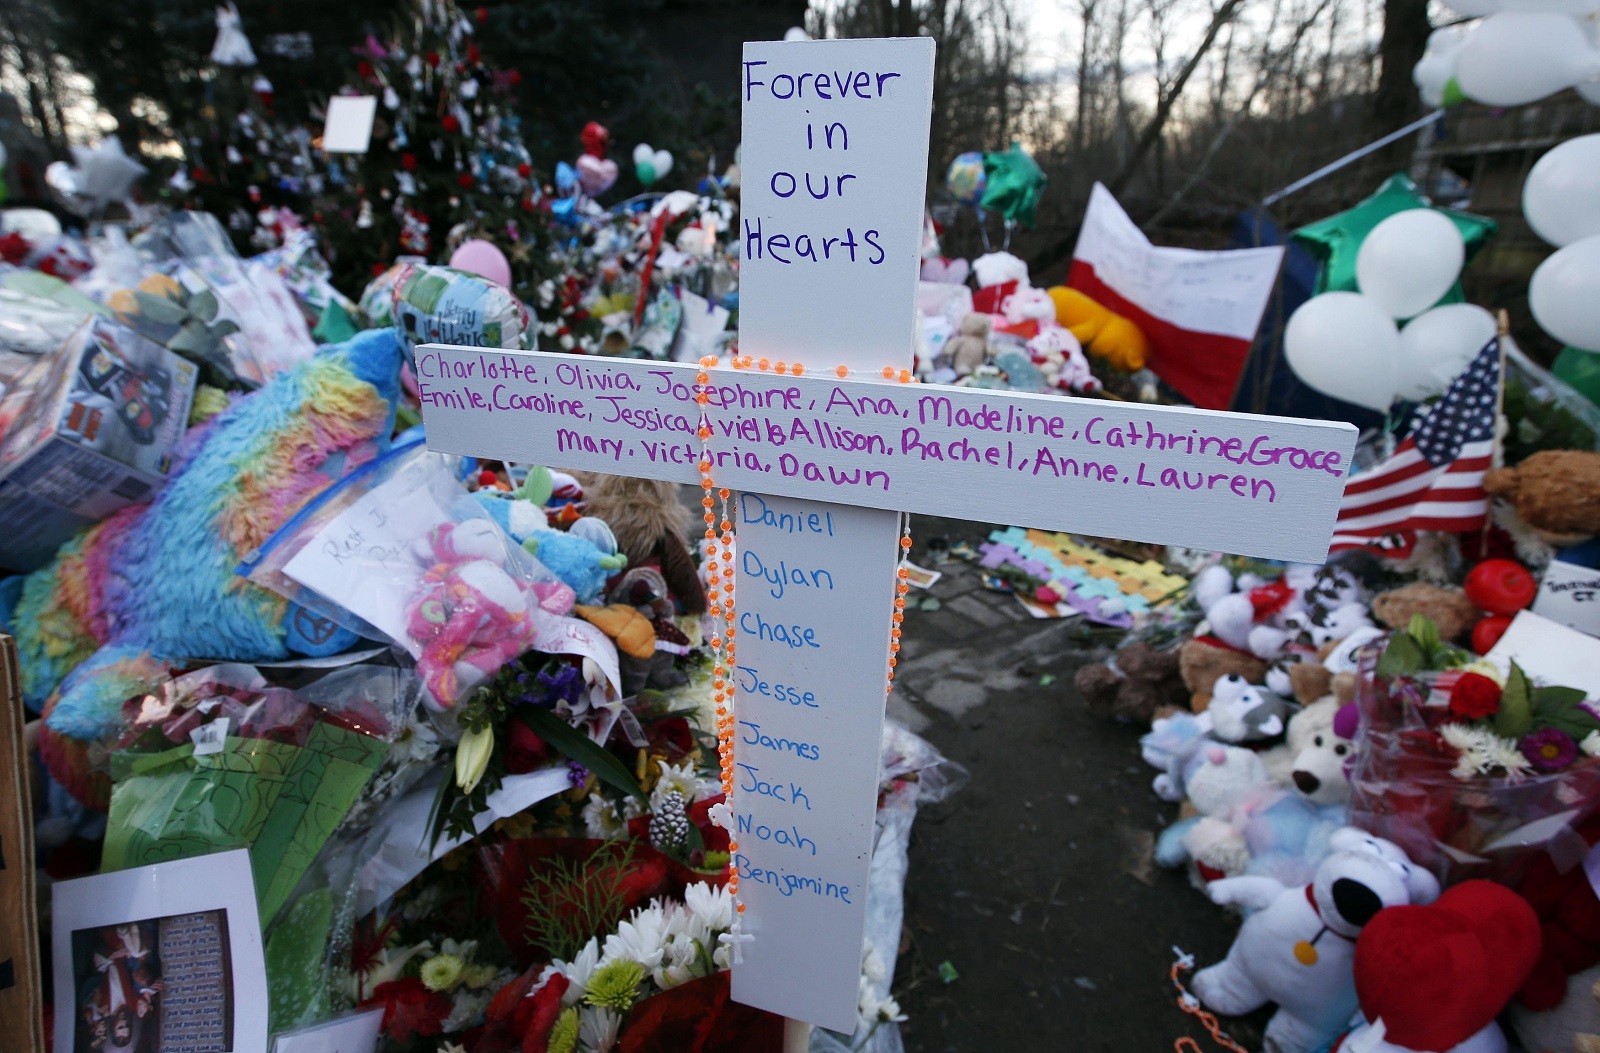 A cross bearing the first names of the victims of the Dec. 14, 2012, shootings at Sandy Hook Elementary School is pictured amid hundreds of other items left by mourners at a memorial in Newtown, Conn., Dec. 19, 2012. Ten years ago a gunman killed 26 people, including 20 children. (CNS photo/Mike Segar, Reuters)